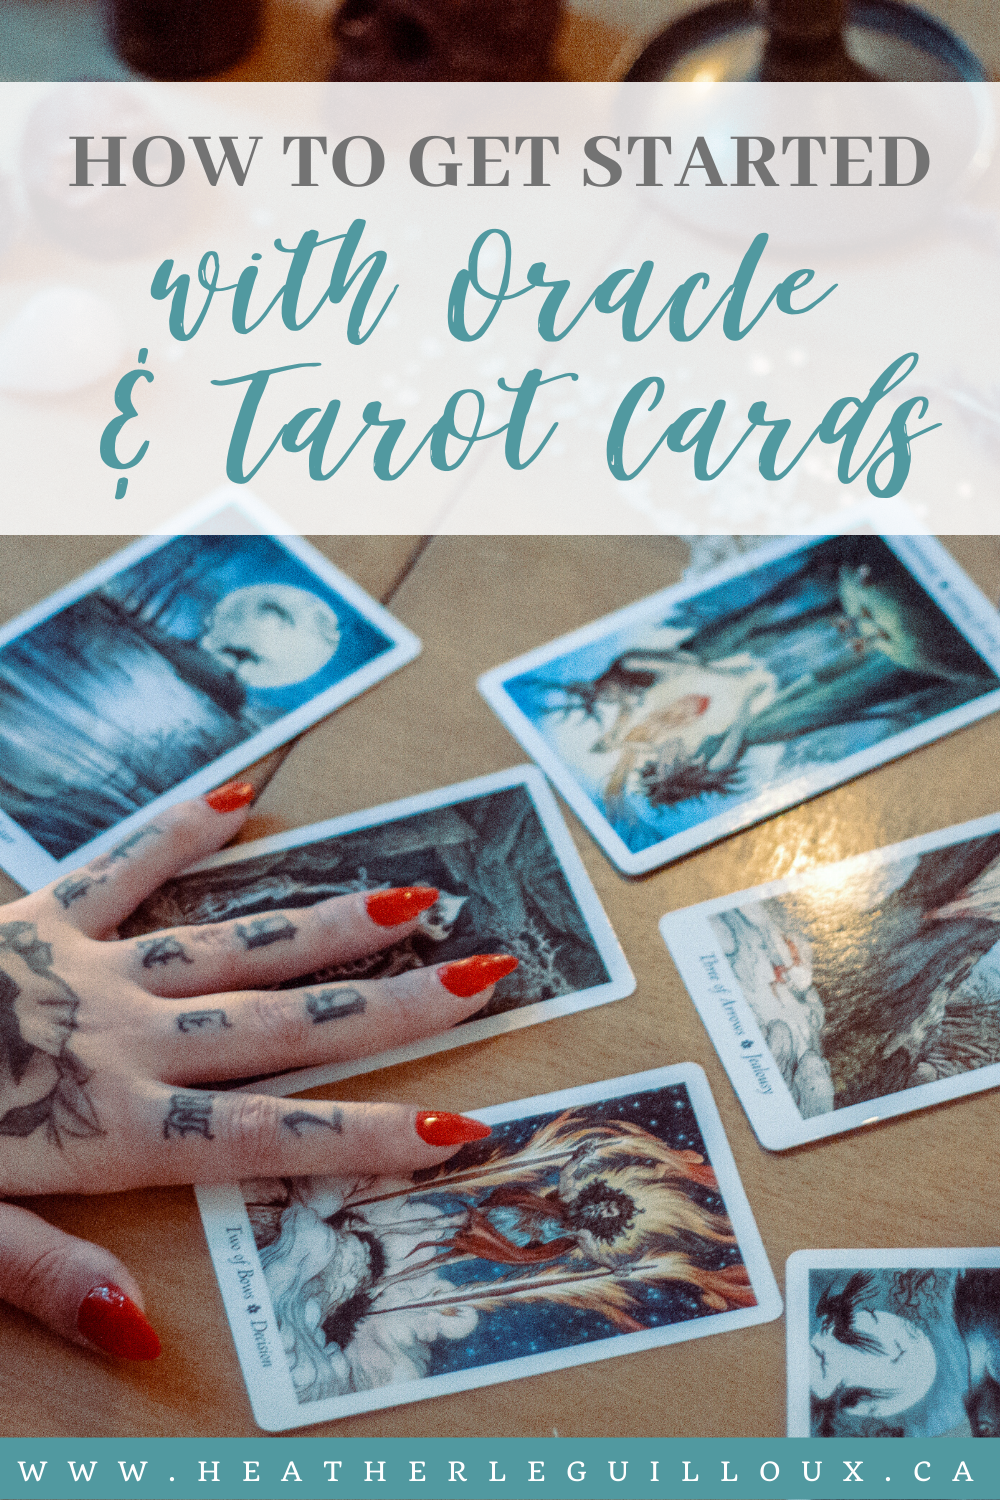 Tarot literally means working with the divine, or your higher self, which is the ultimate purpose of tarot cards. This can be an important concept to distinguish from this practice being able to tell a persons future. Oracle or tarot decks can be a fantastic tool to use on a journey of understanding the self better and on deciding the path to take forward. Learn the basics and get started on your own soul journey! #tarotcards #TarotReading #oraclecards #giveaway #Contest #blogger #starseeds